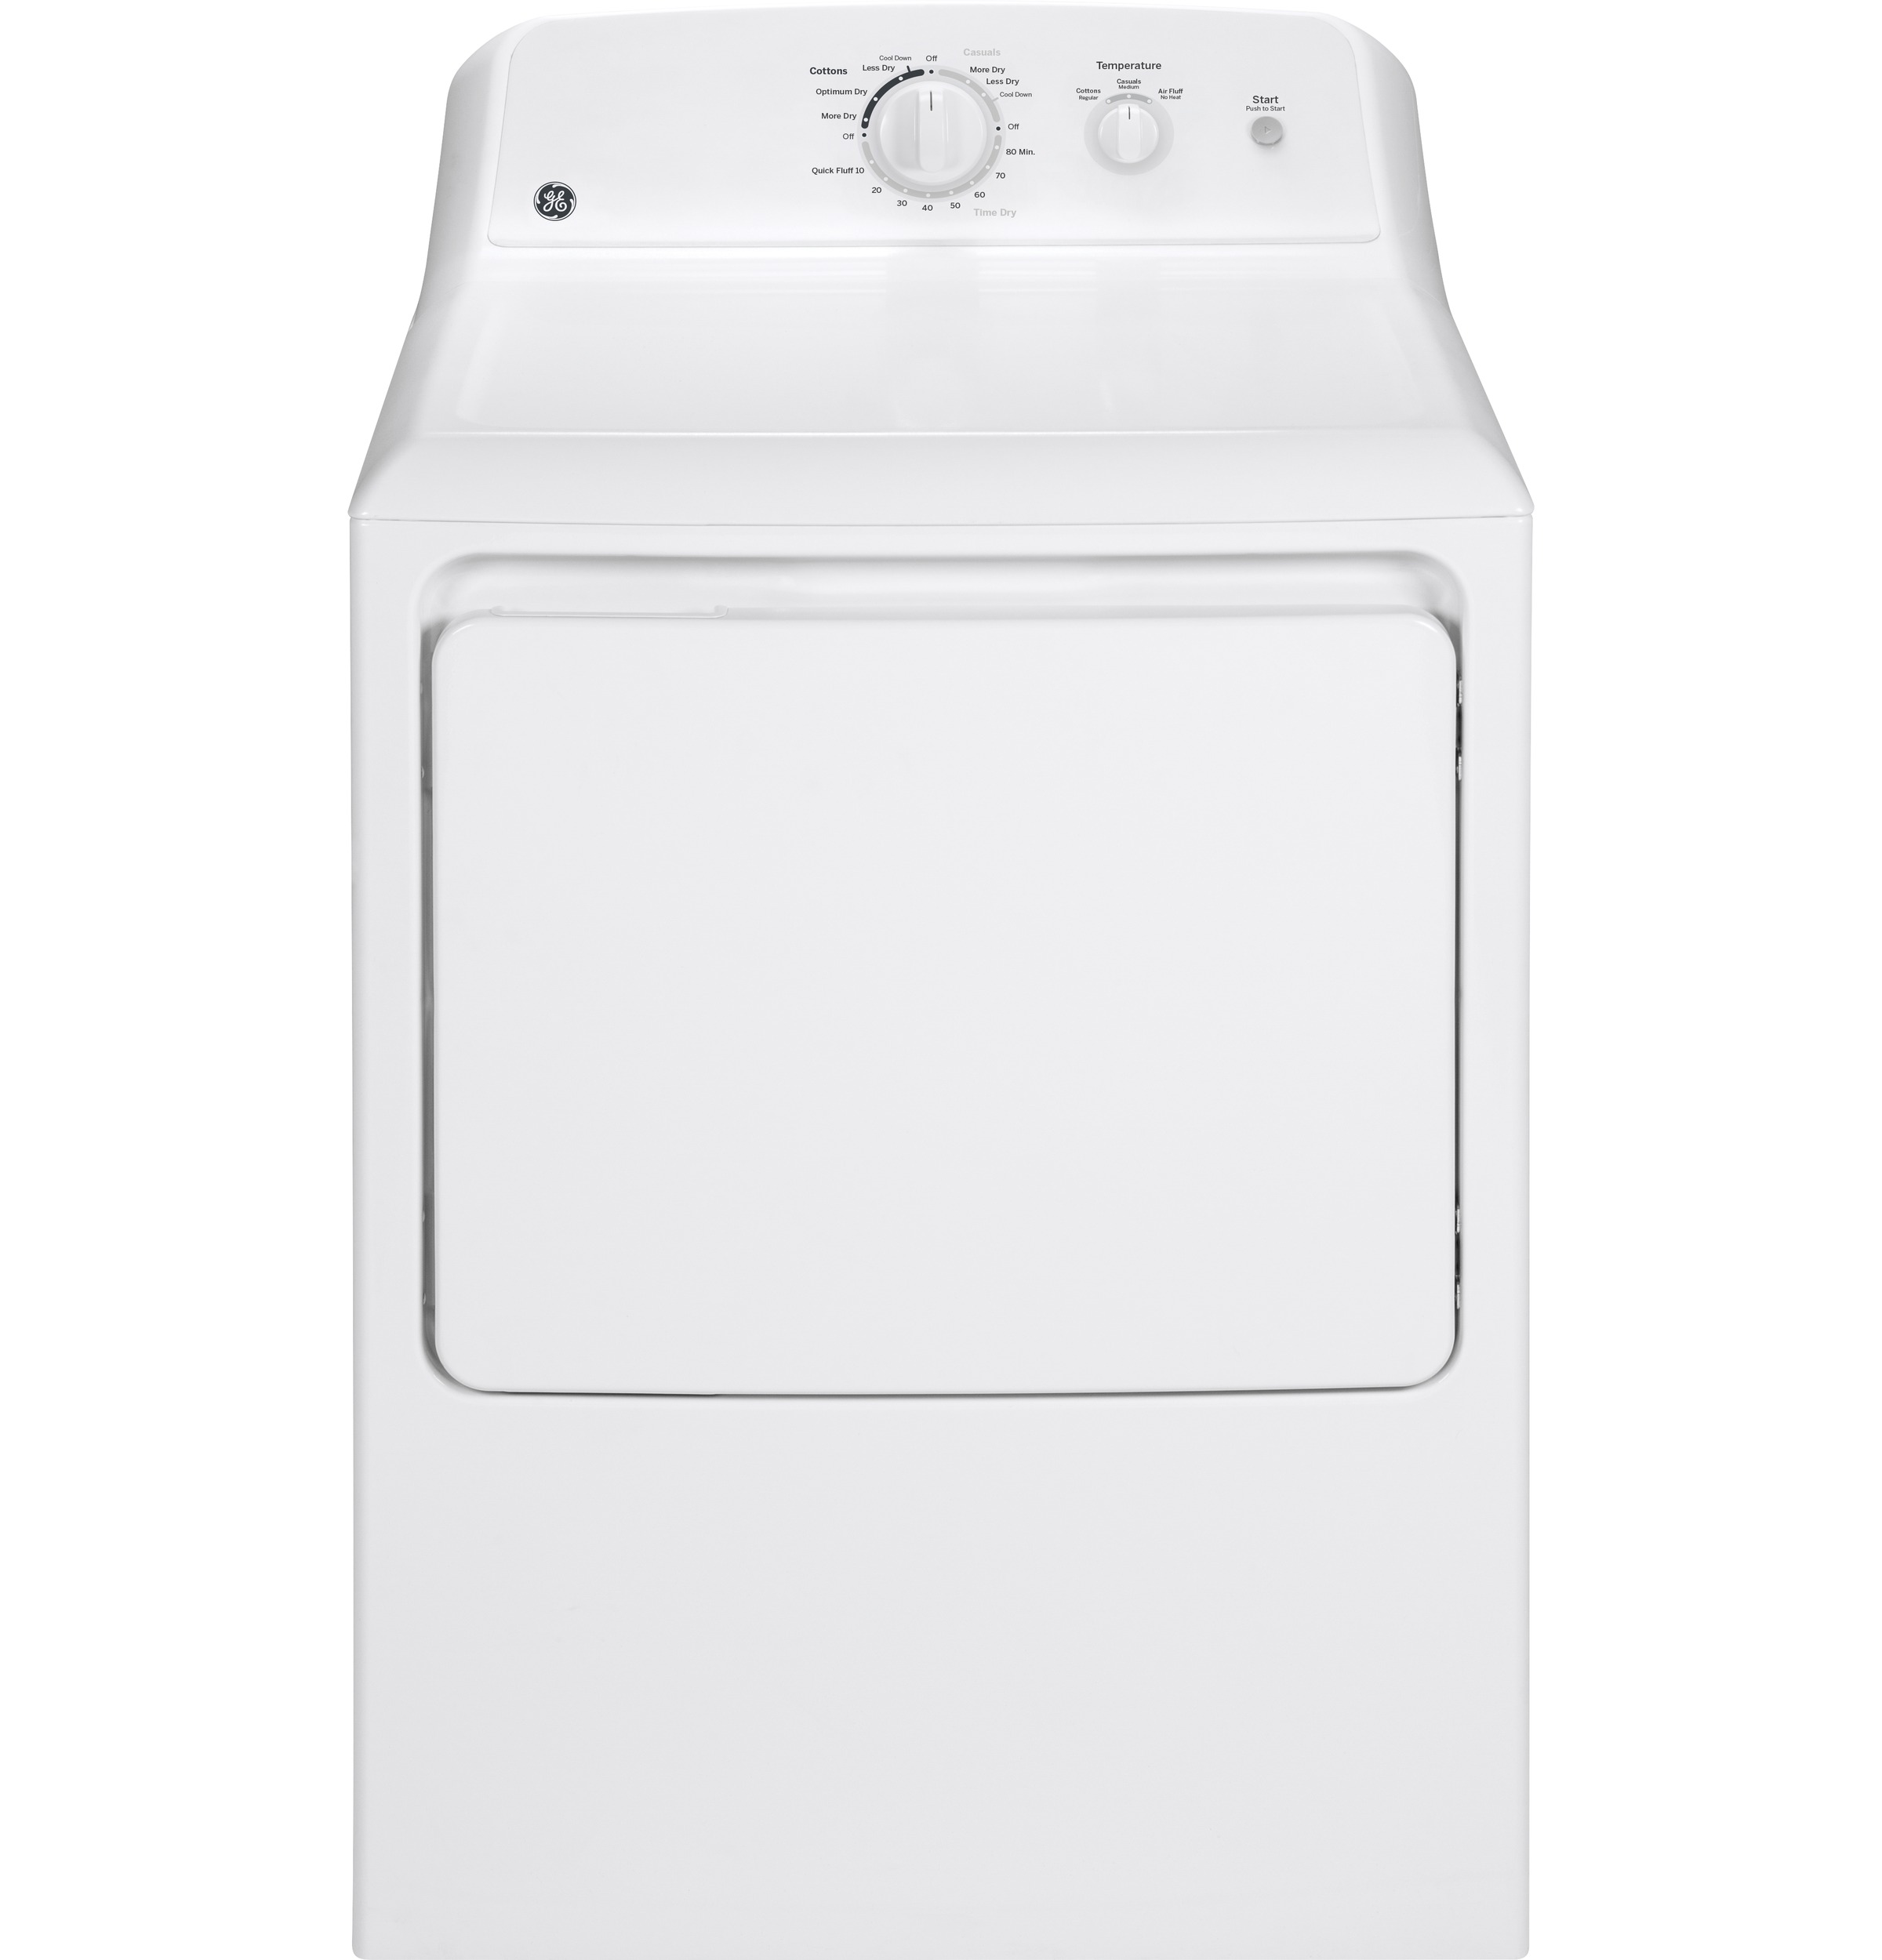 GE 6.2 cu. ft. Capacity Gas Dryer with Up To 120 ft. Venting and Shallow Depth​